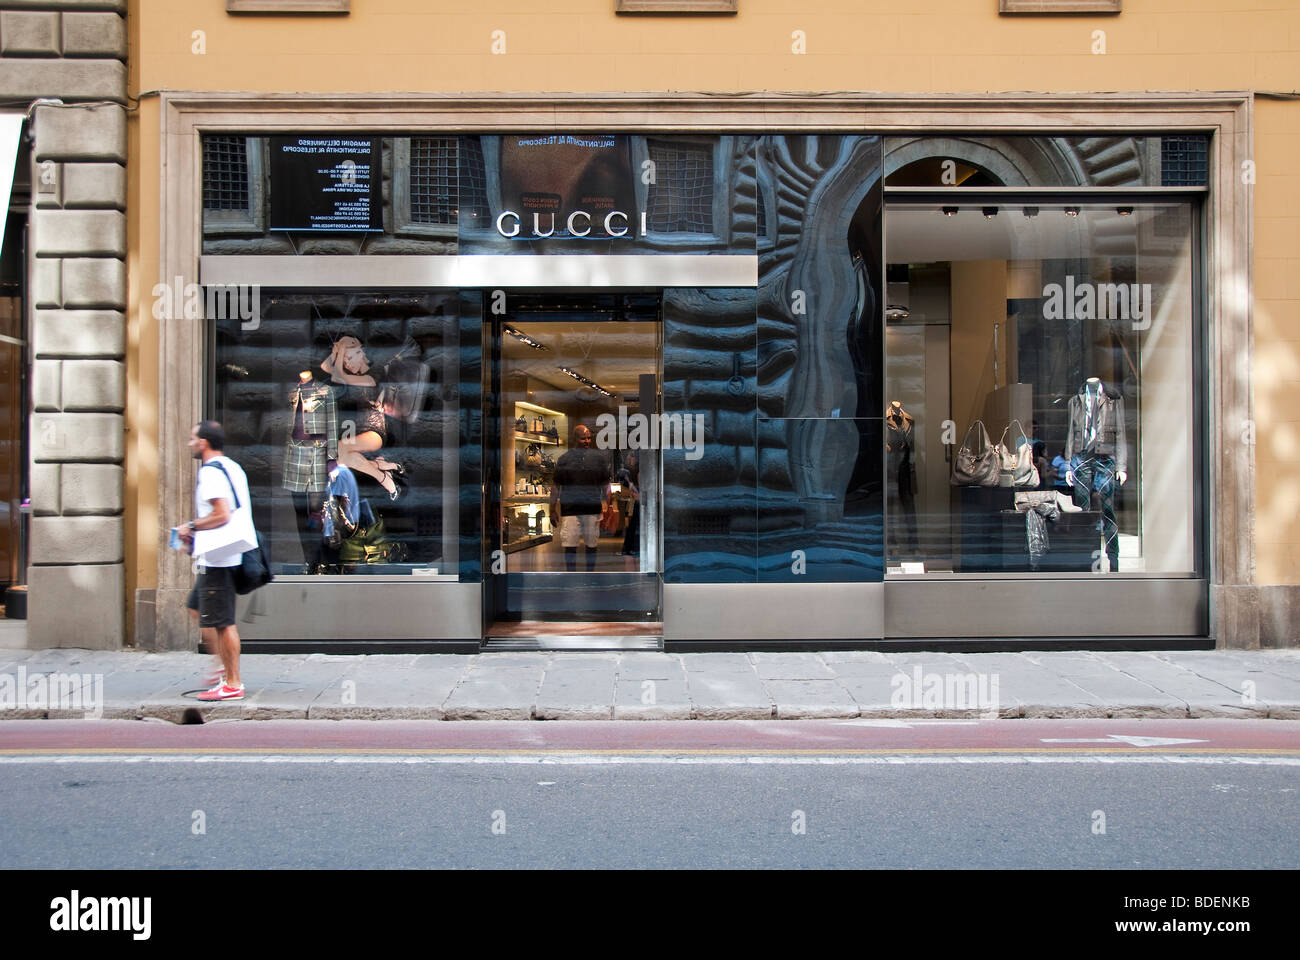 Gucci shop front in Via Tornabuoni, Florence Stock Photo, Royalty Free Image: 25525231 - Alamy